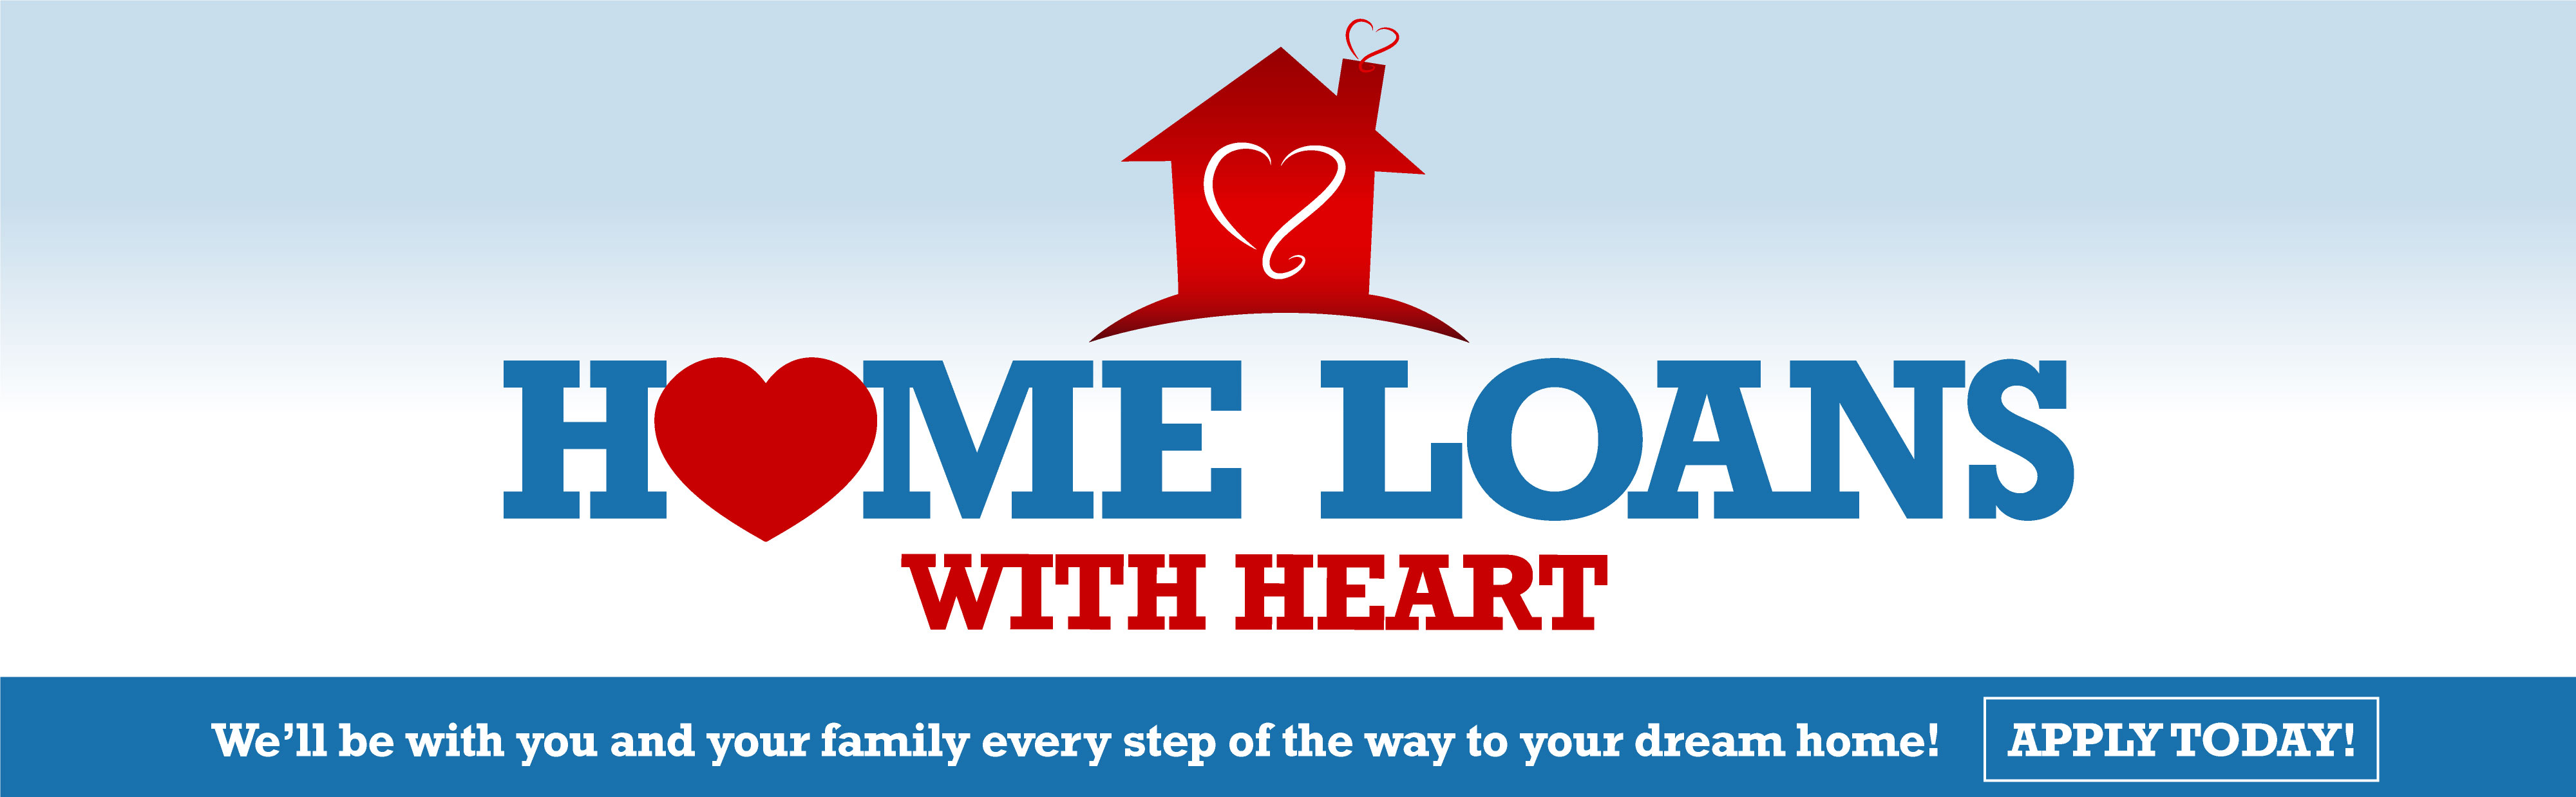 Home Loans with Heart